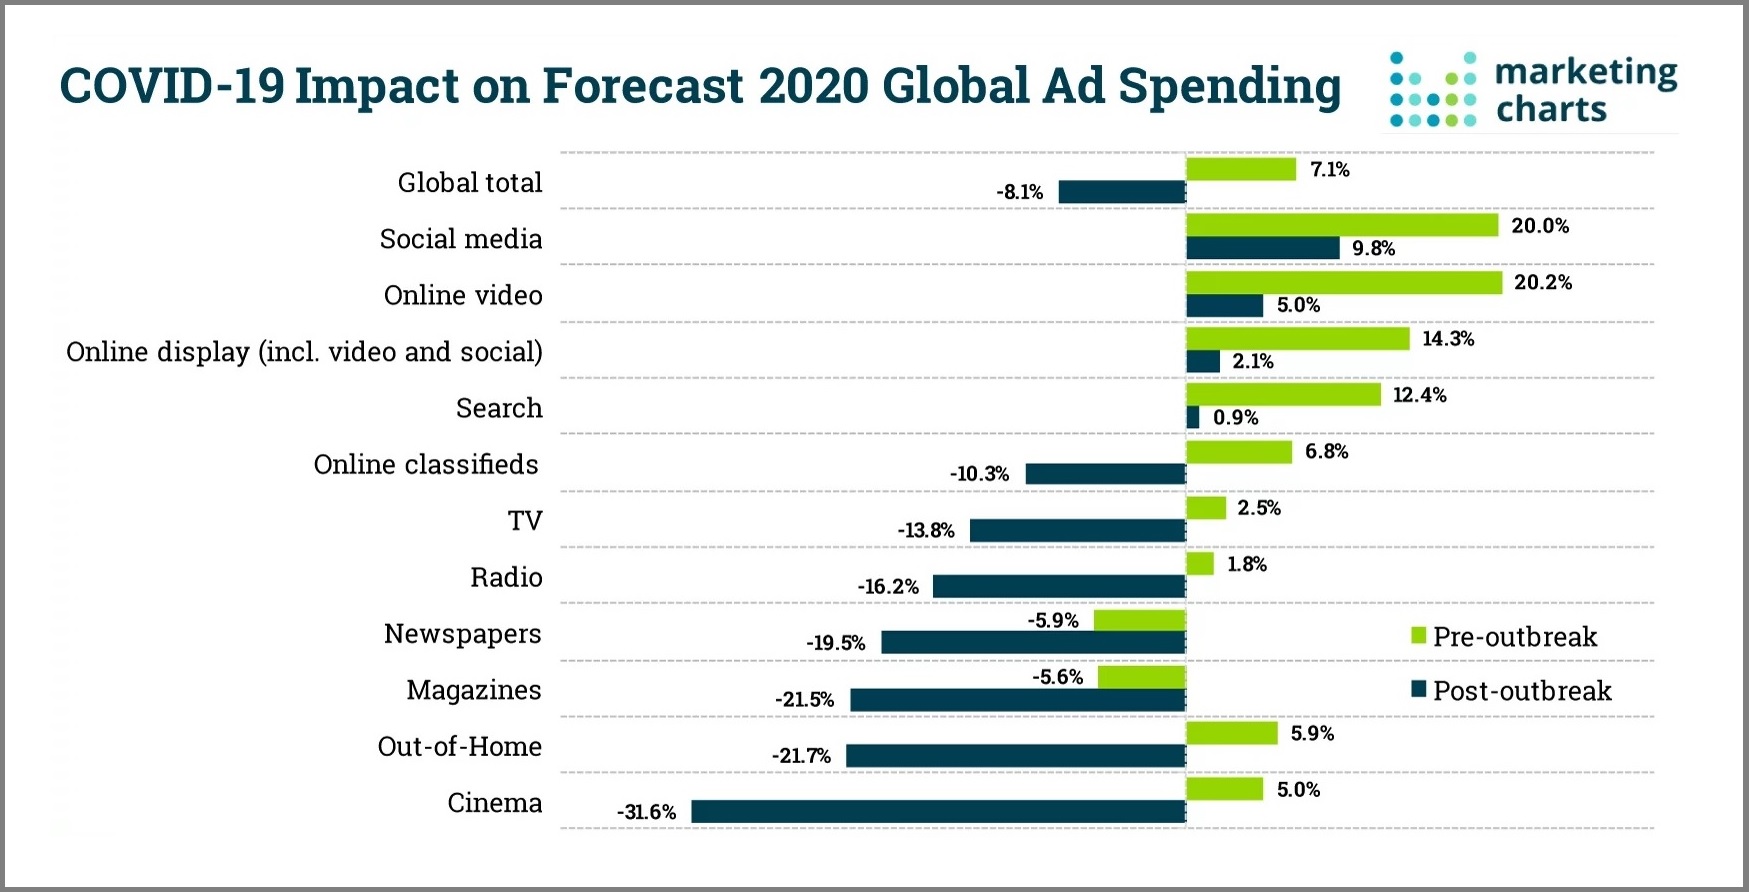 Source: Global Ad Trends: COVID-19 & Ad Investment Report by WARC